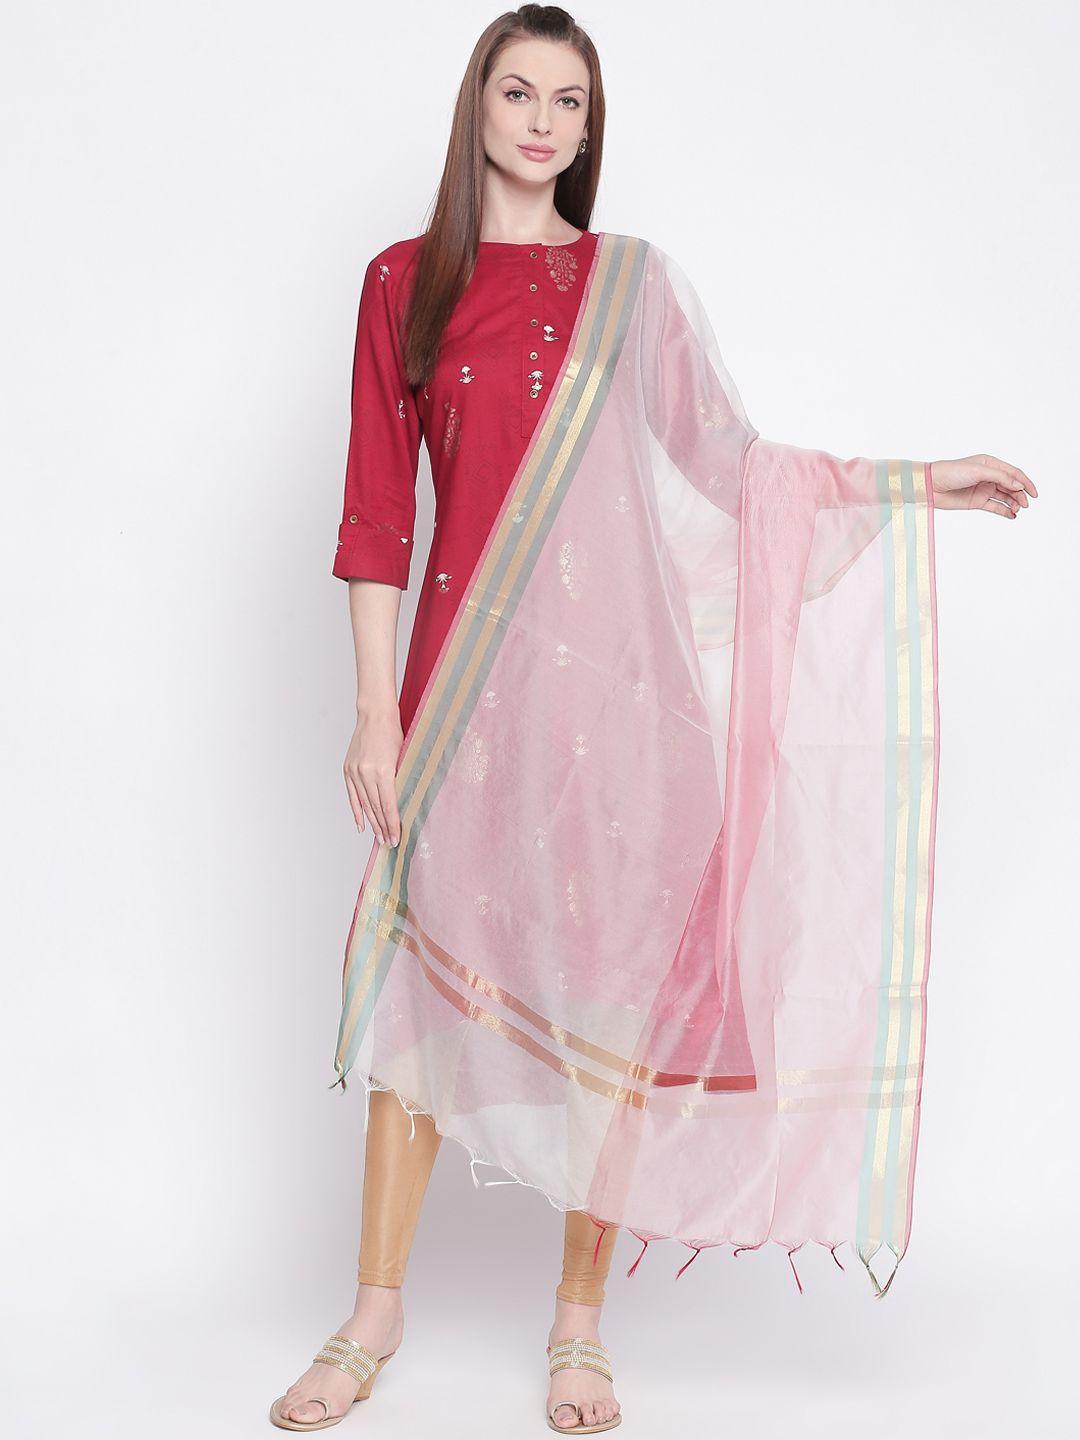 rangmanch by pantaloons off-white & gold-coloured solid dupatta